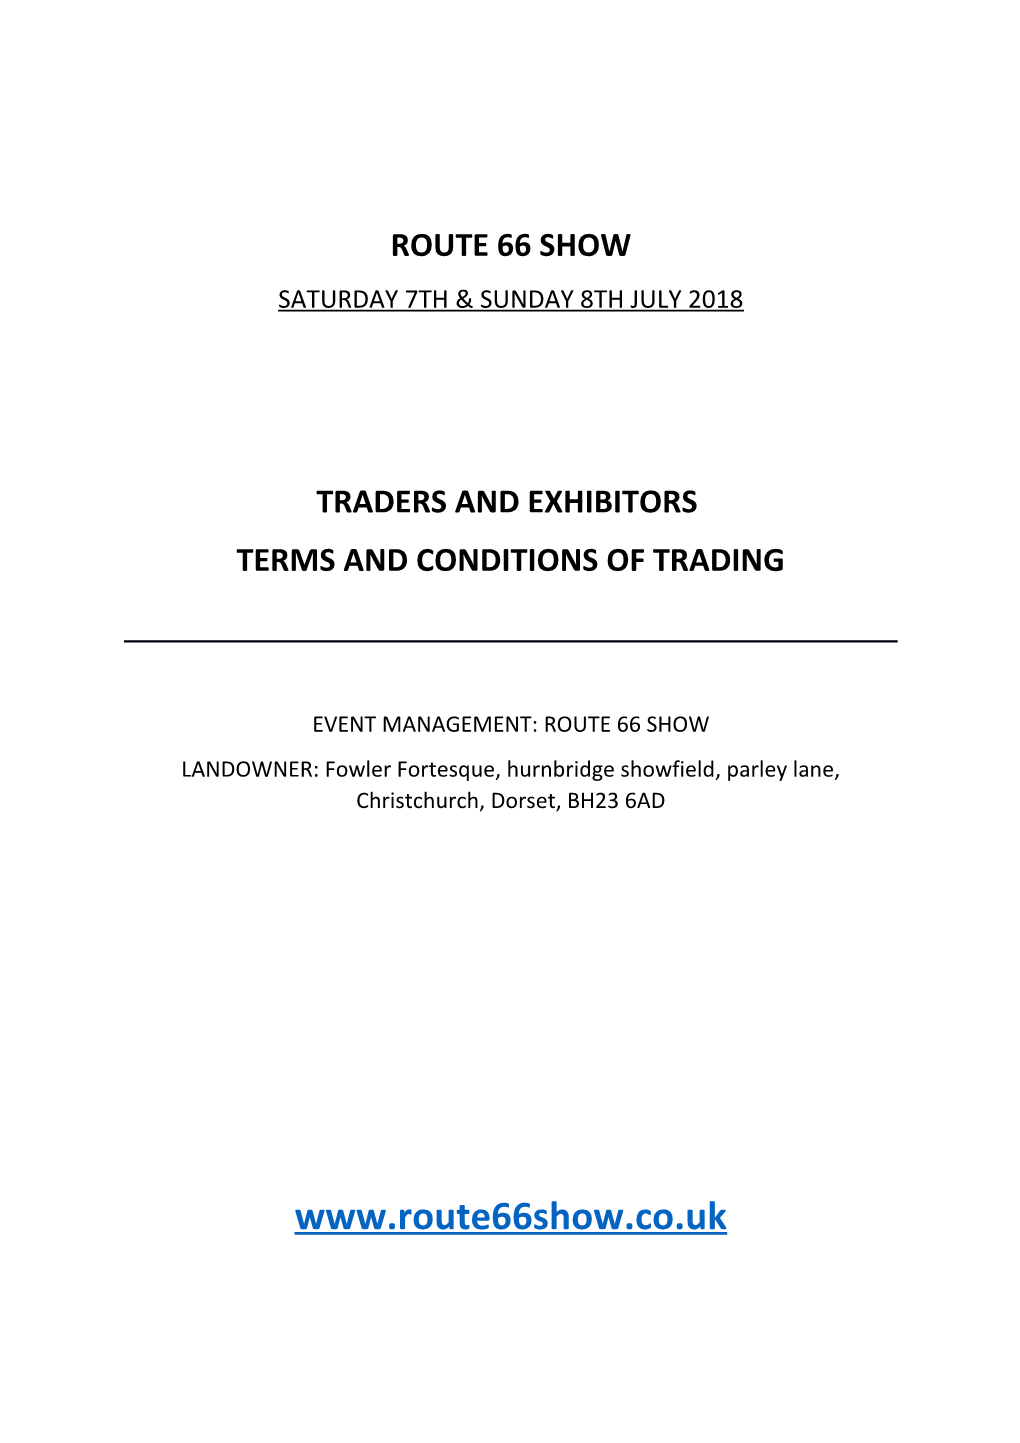 Terms and Conditions of Trading